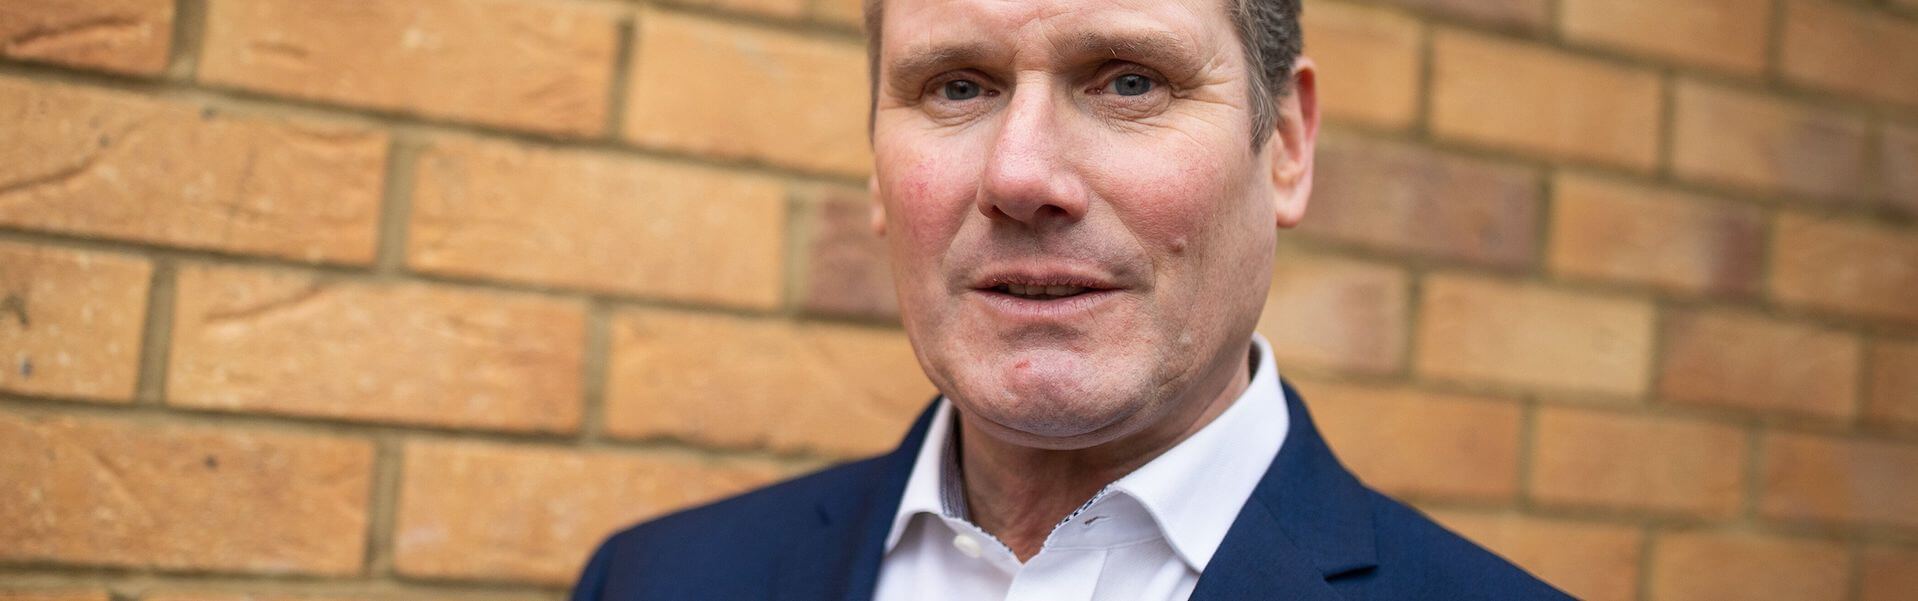 Sir Keir Starmer’s transformation of the Labour Party